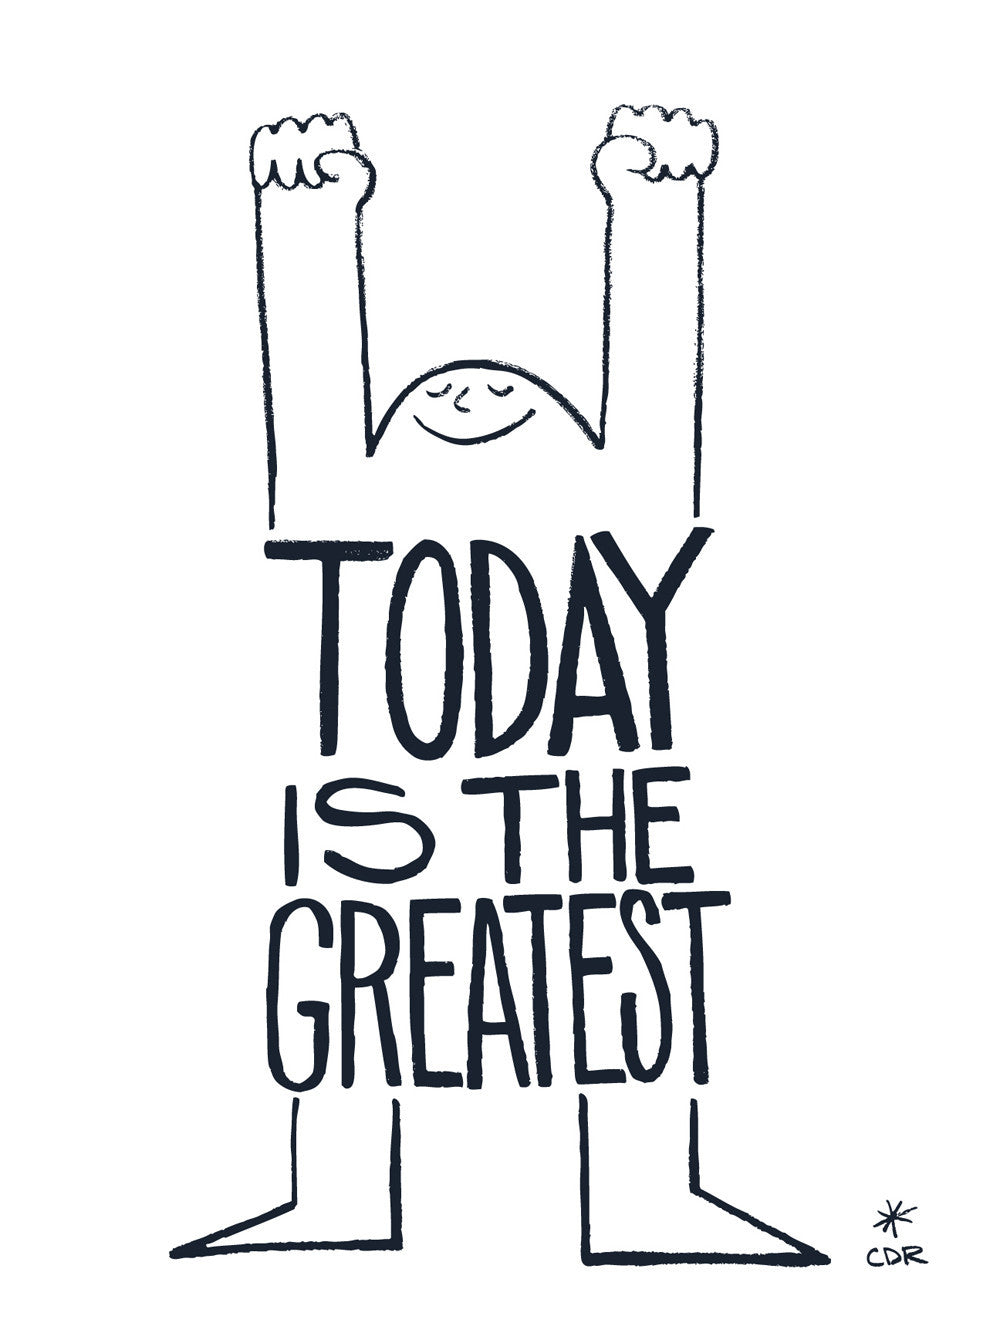 Today is the Greatest